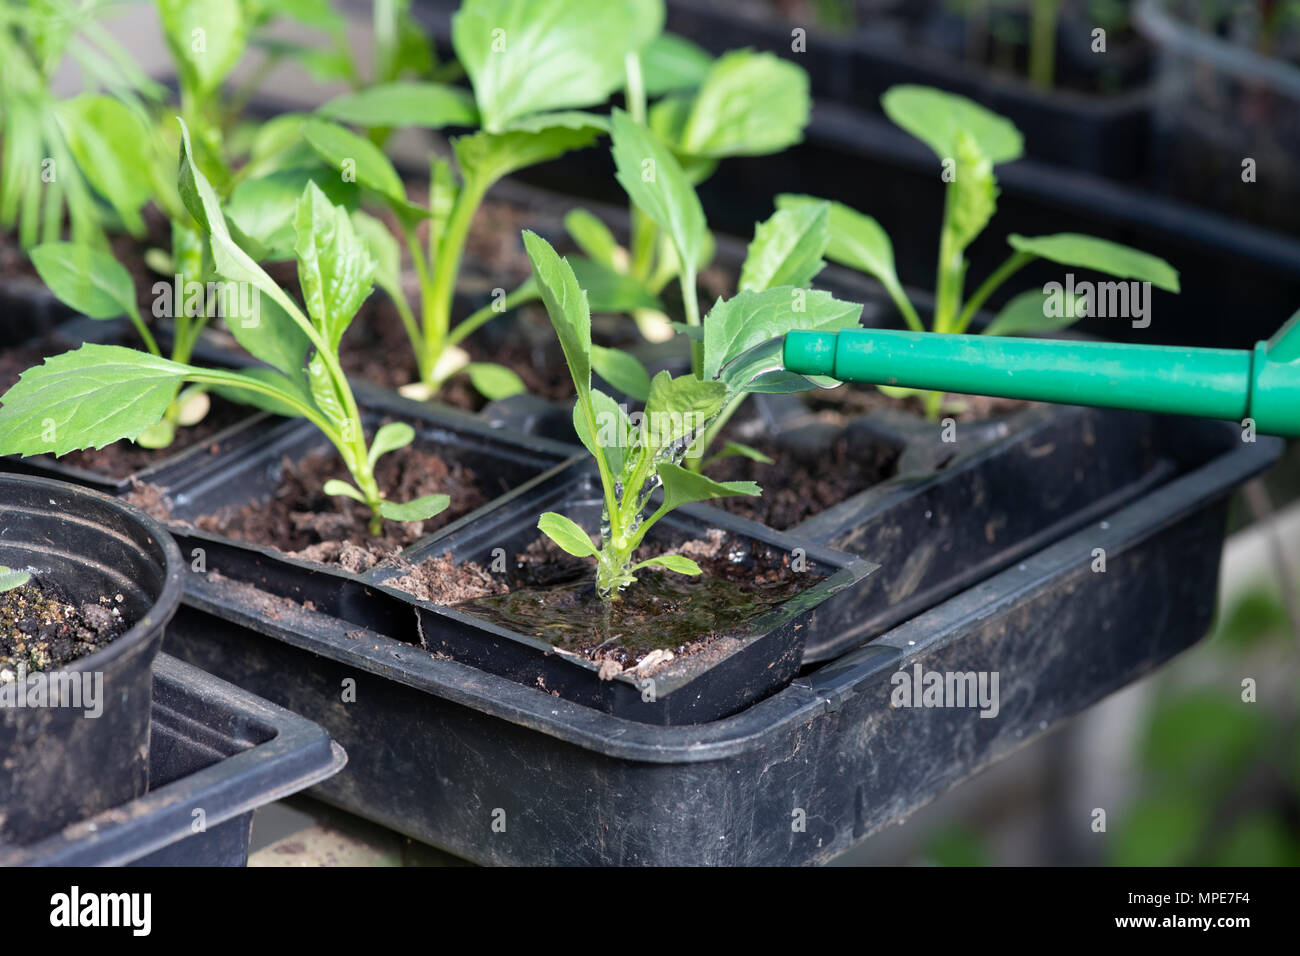 Callistephus chinensis. Watering china aster seedlings in a greenhouse. UK Stock Photo